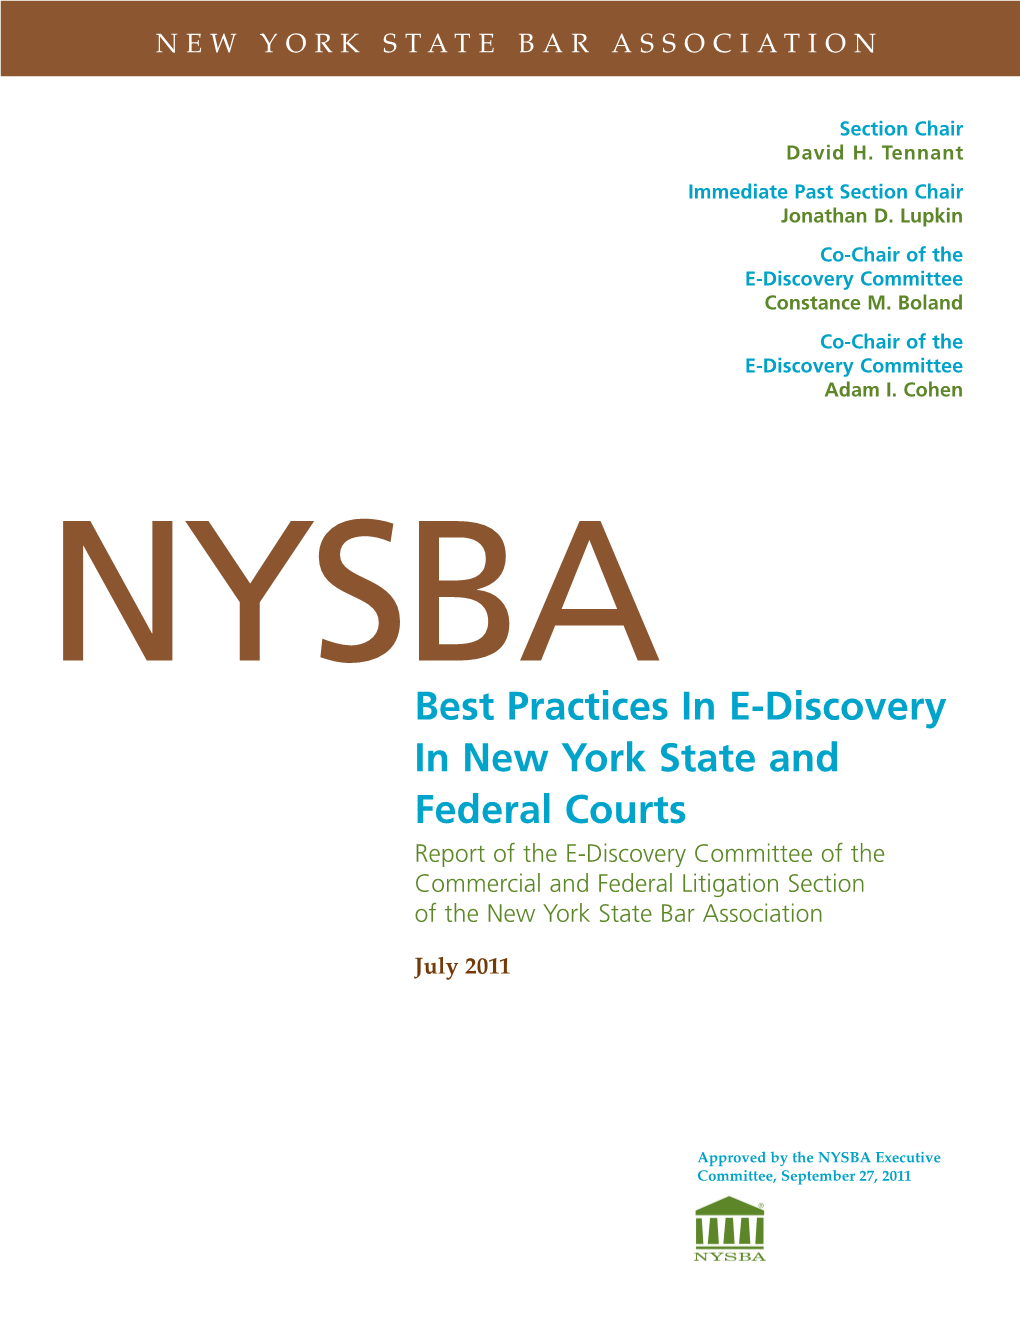 Best Practices in E-Discovery in New York State and Federal Courts